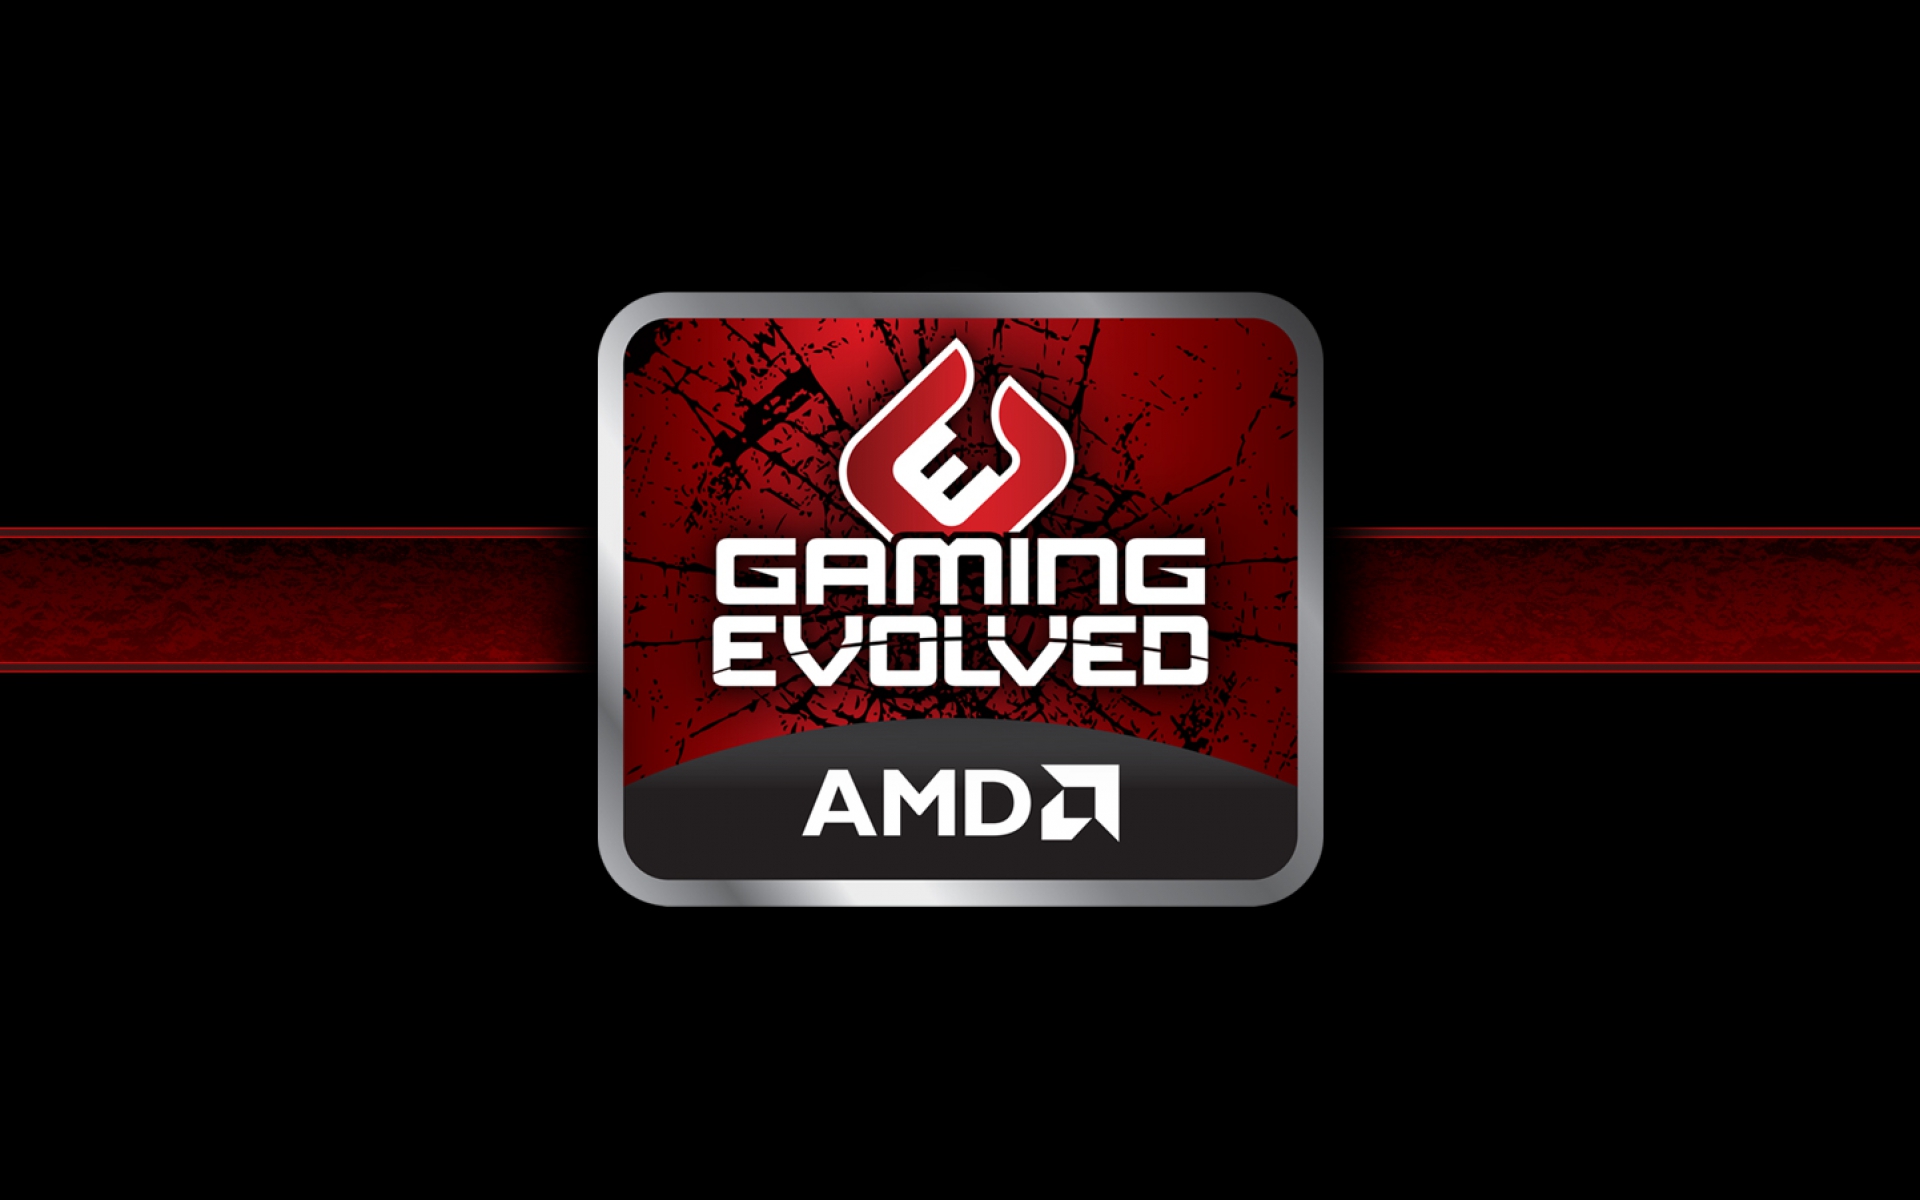 HQ Amd pictures | 4K Wallpapers